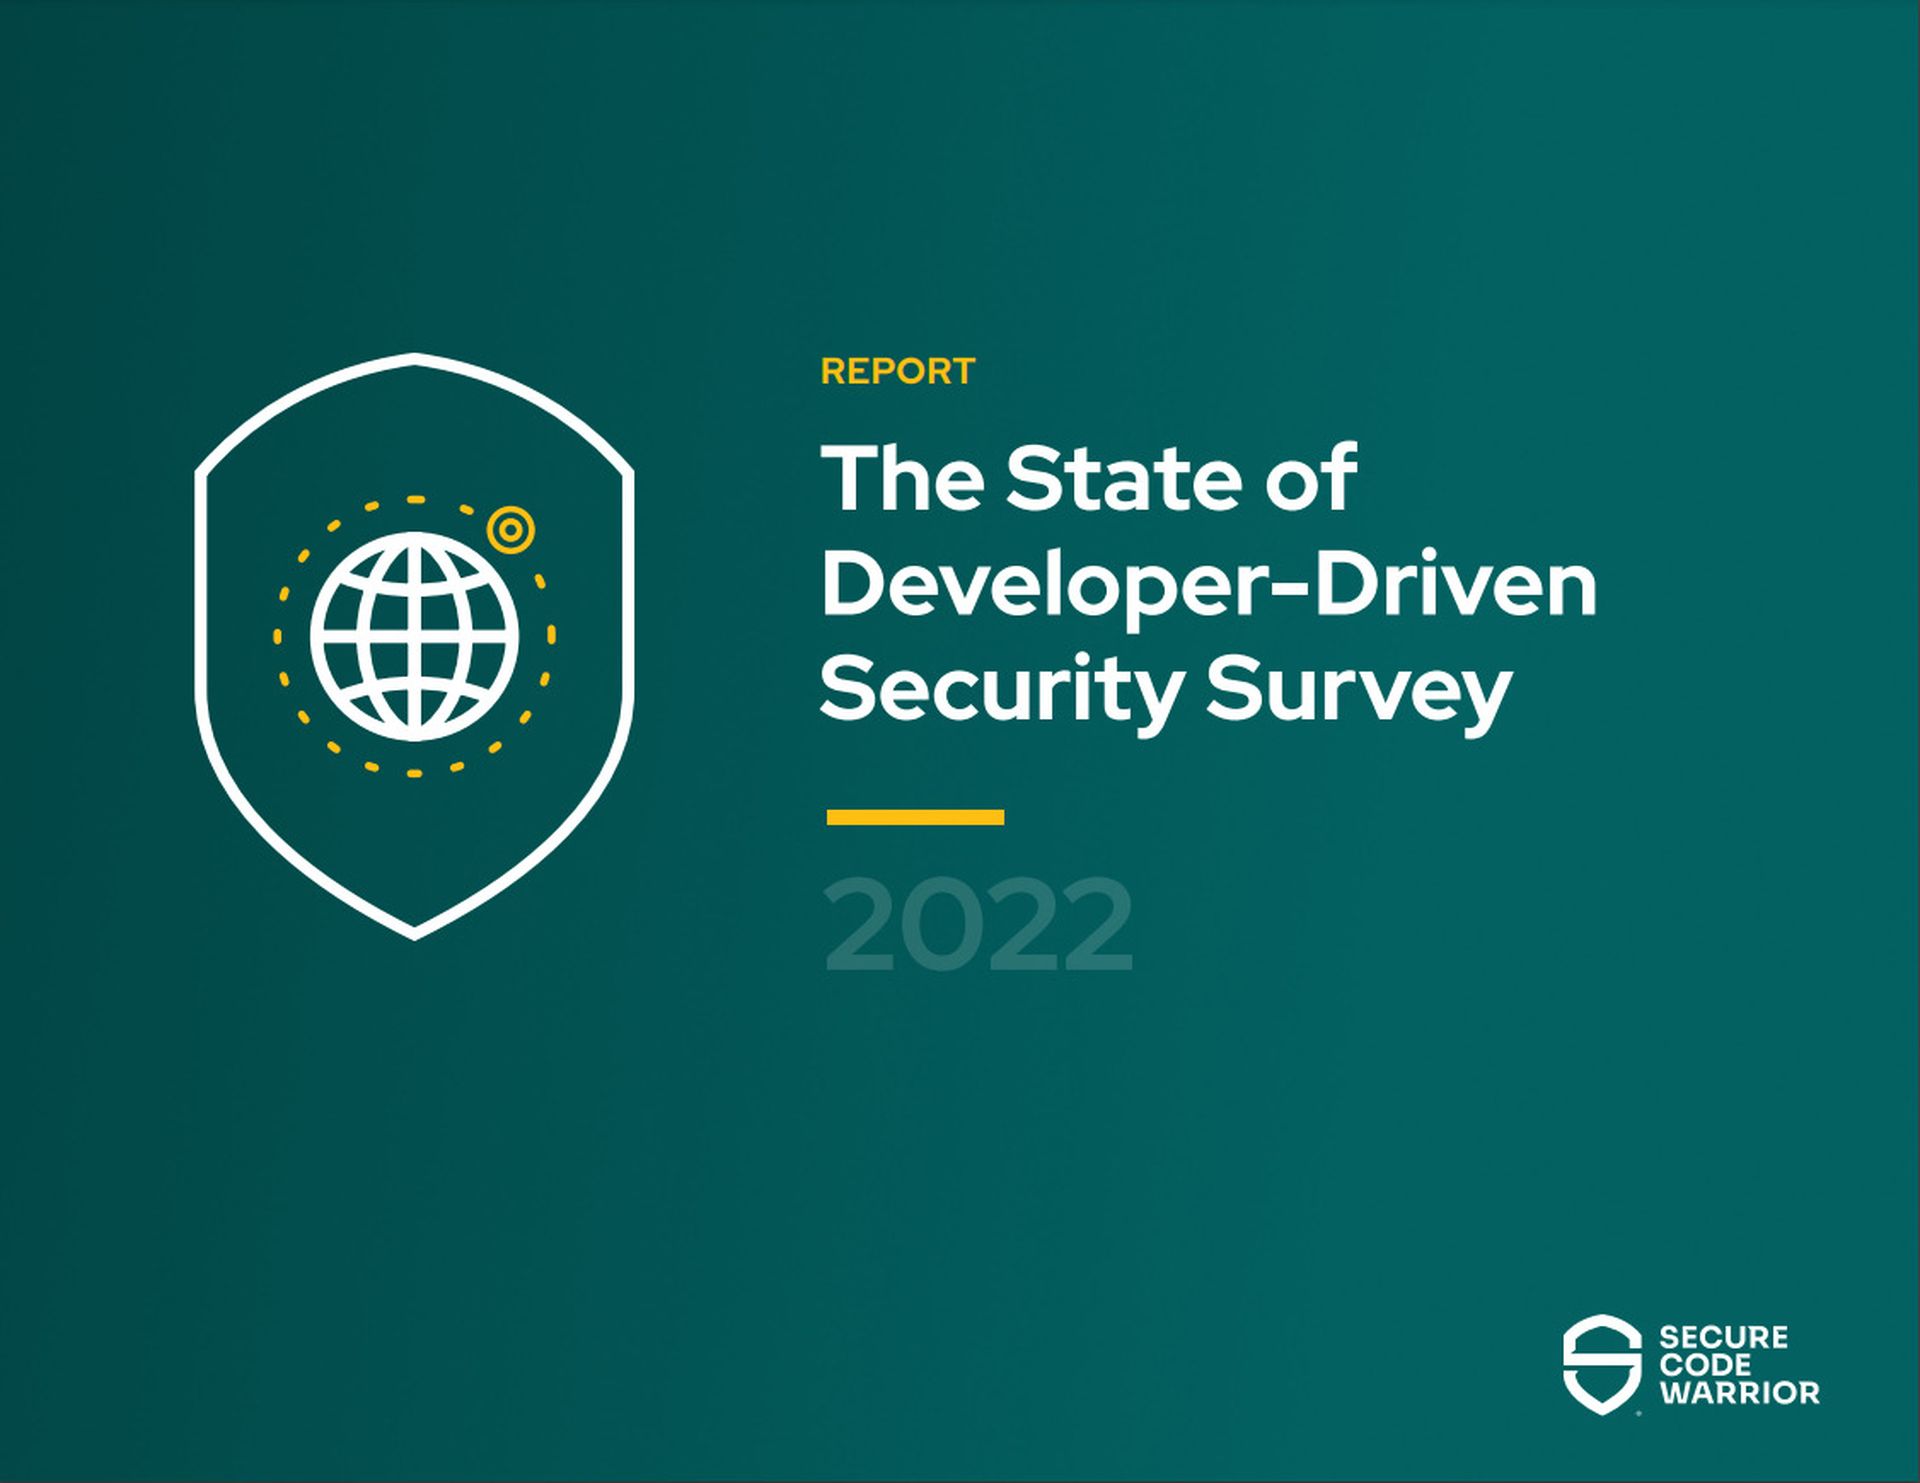 The State of Developer-Driven Security 2022